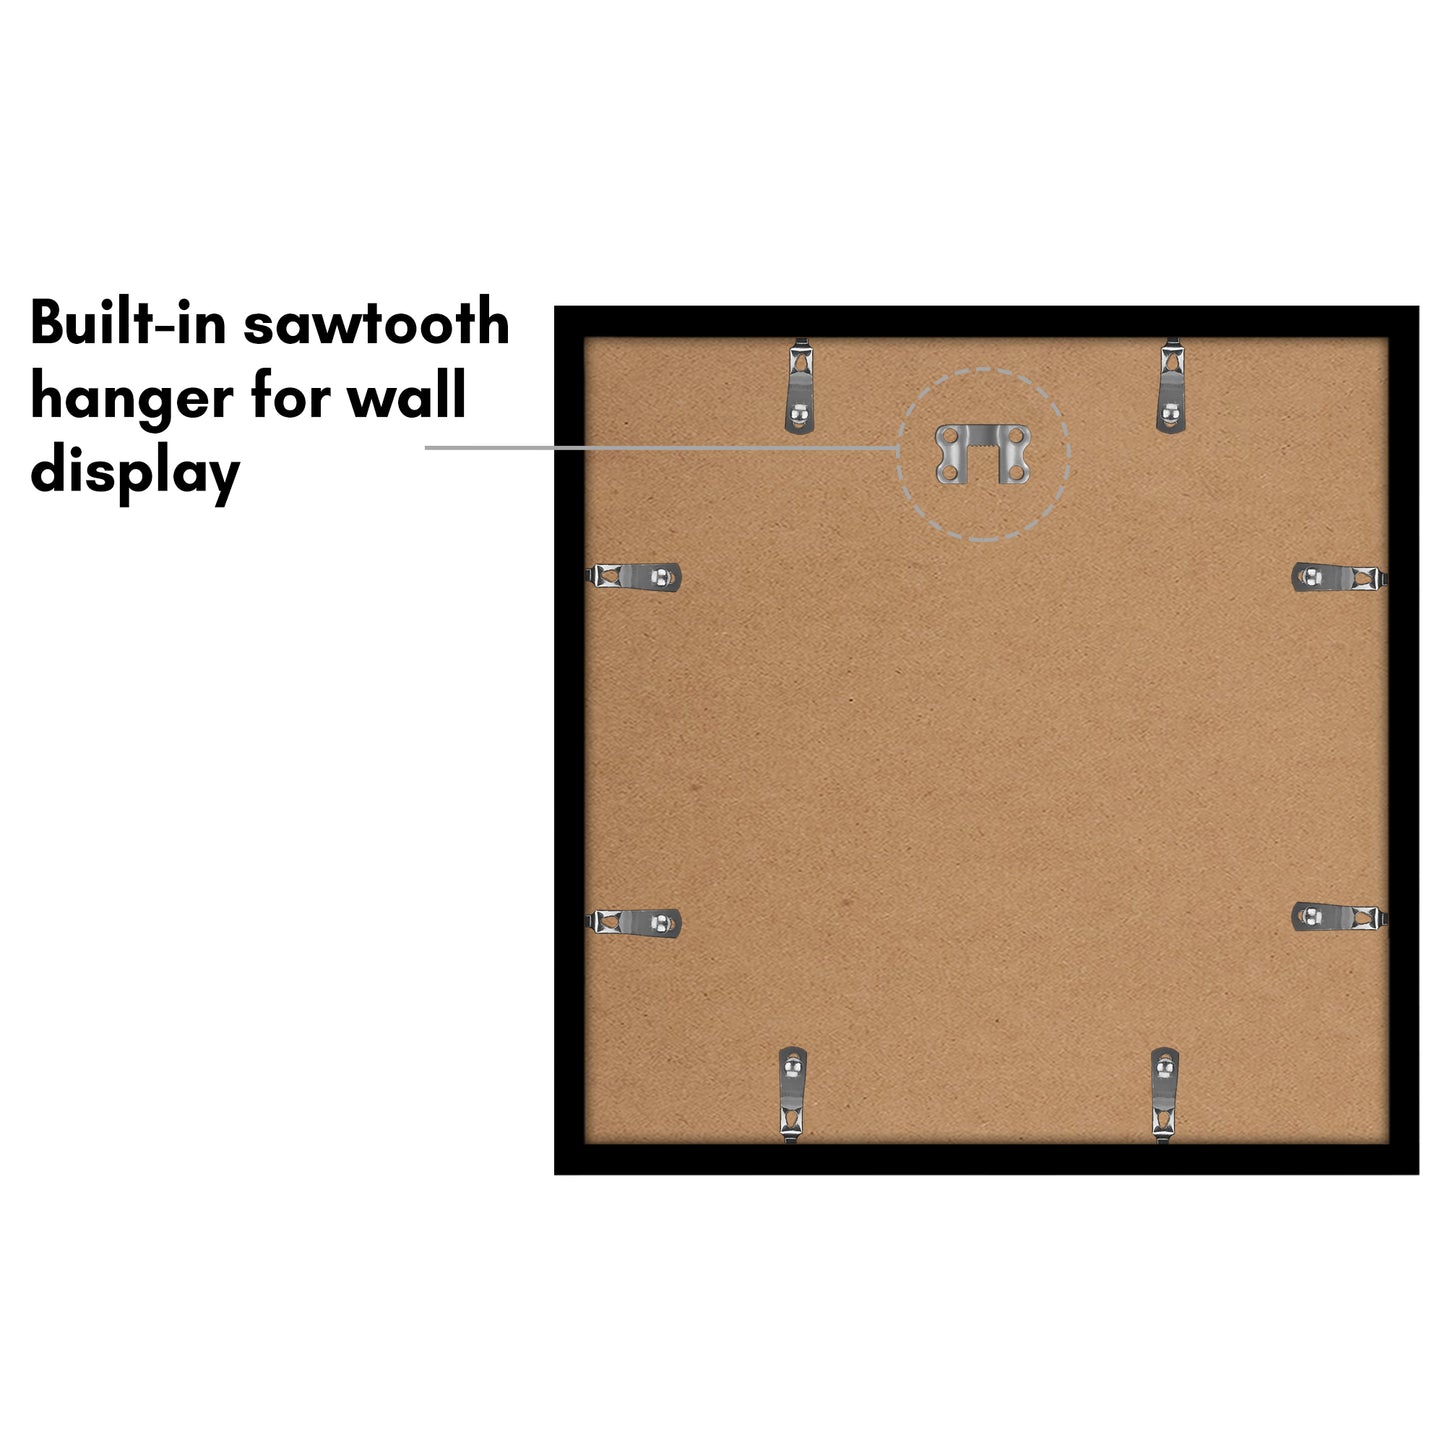 Picture Frame - Set of 2 - with Mat or Without Mat - Plexiglass Cover and Hanging Hardware included